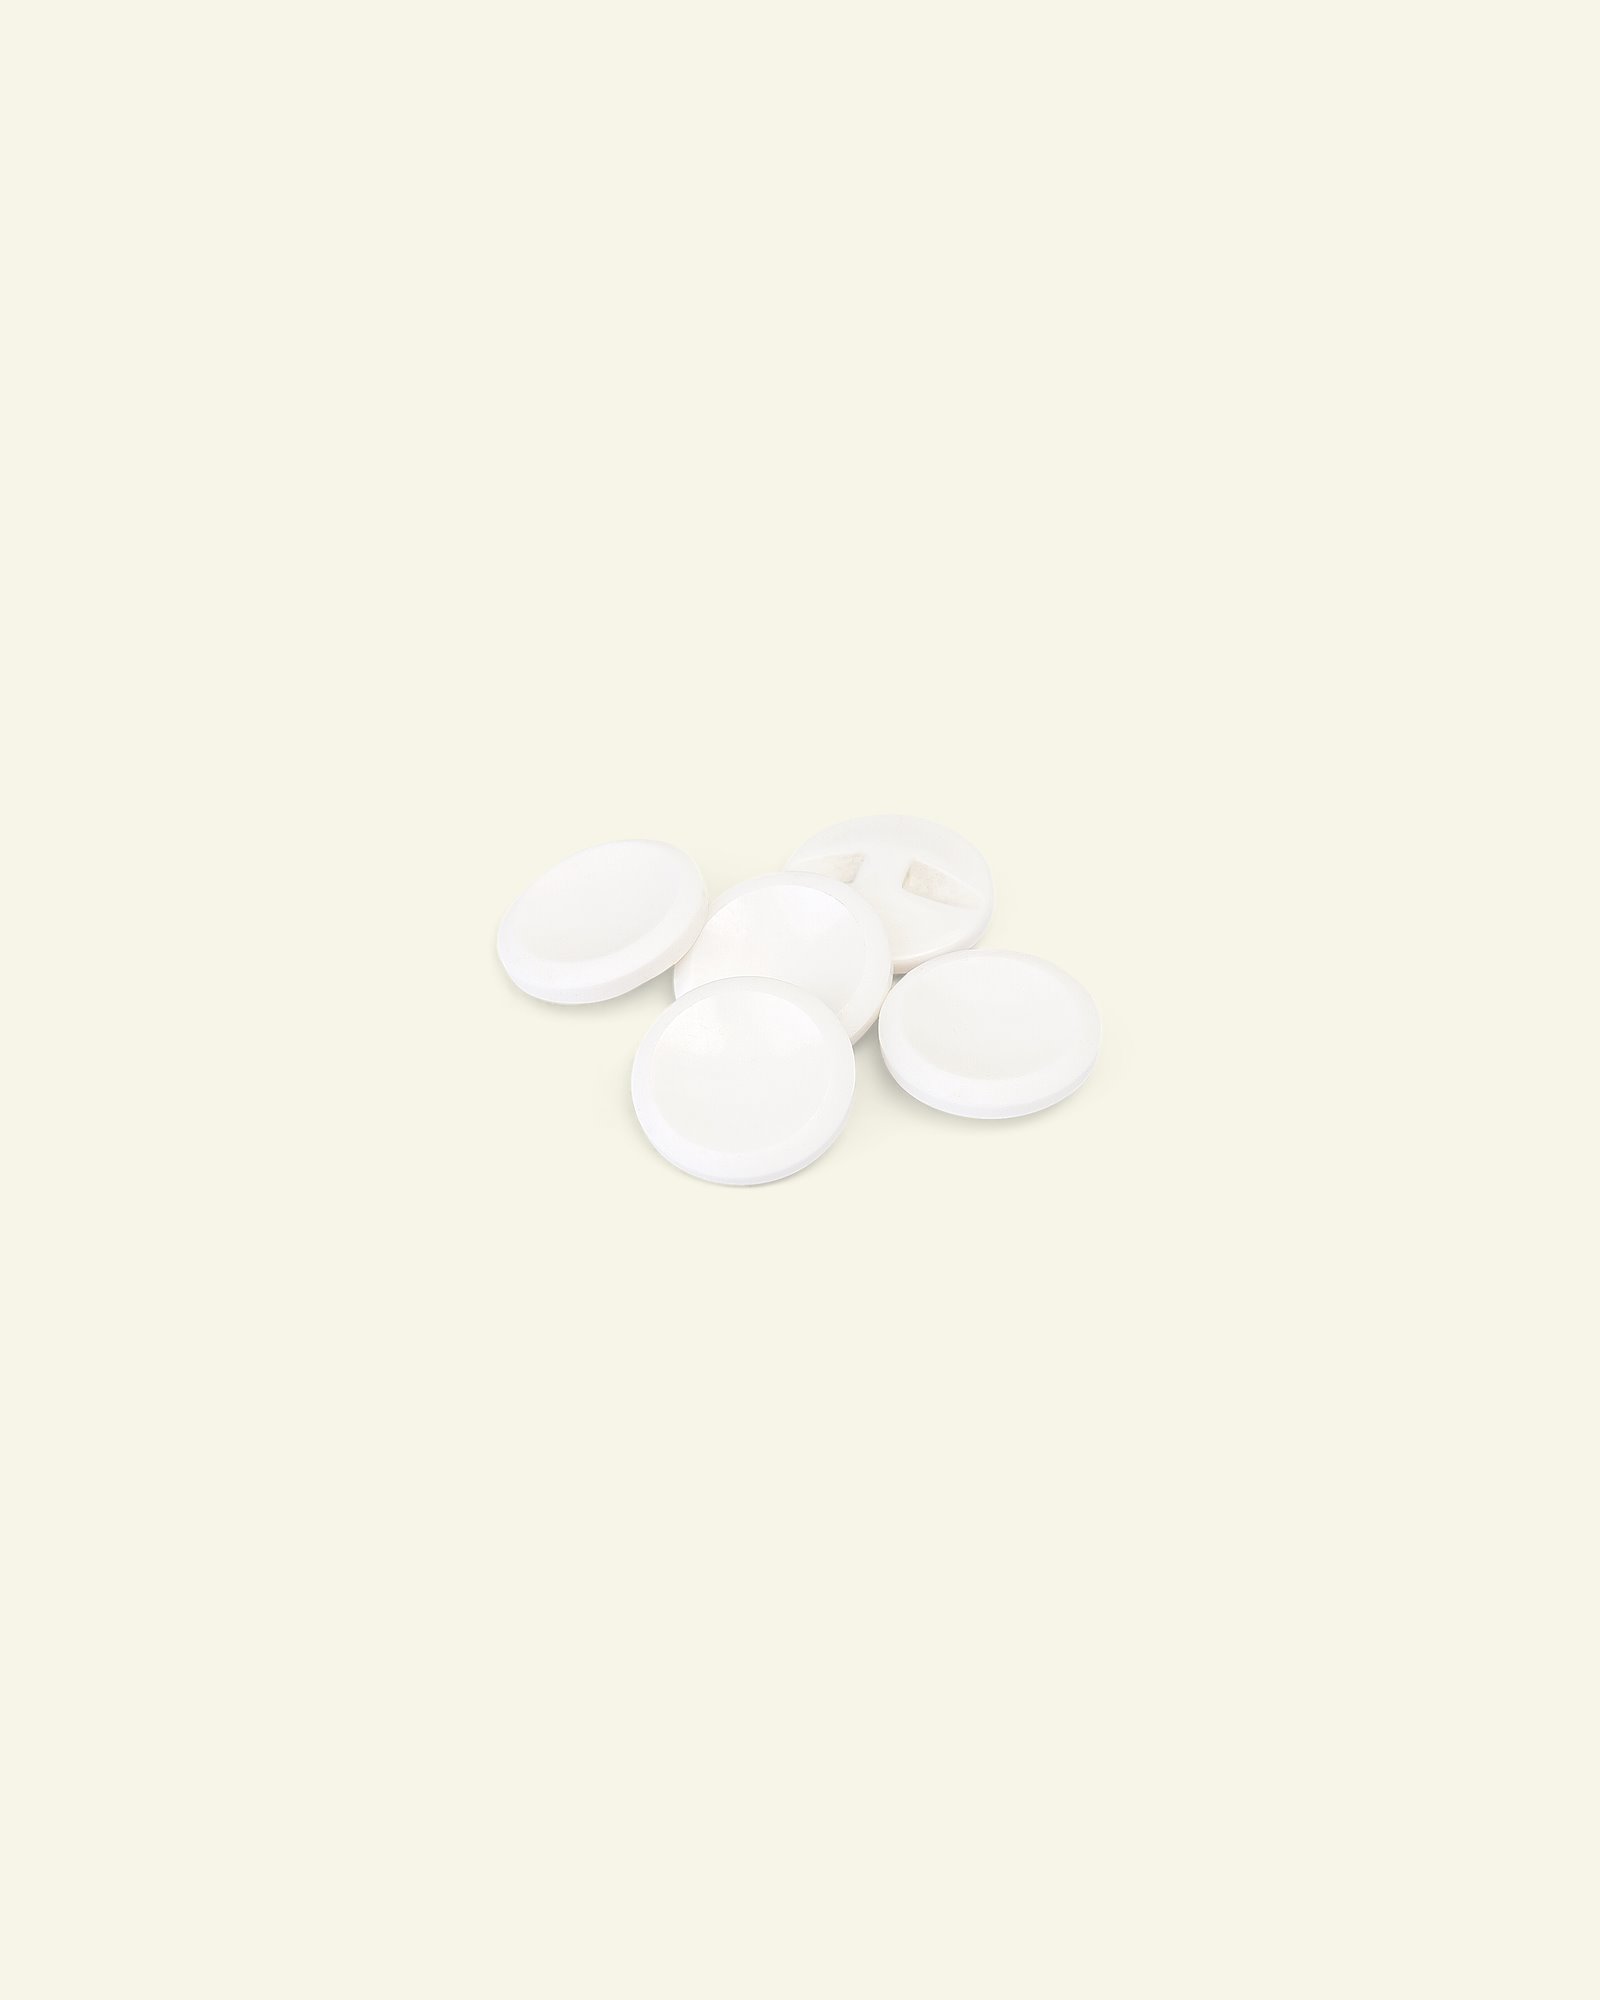 Shank button 15mm white 5pcs 33075_pack